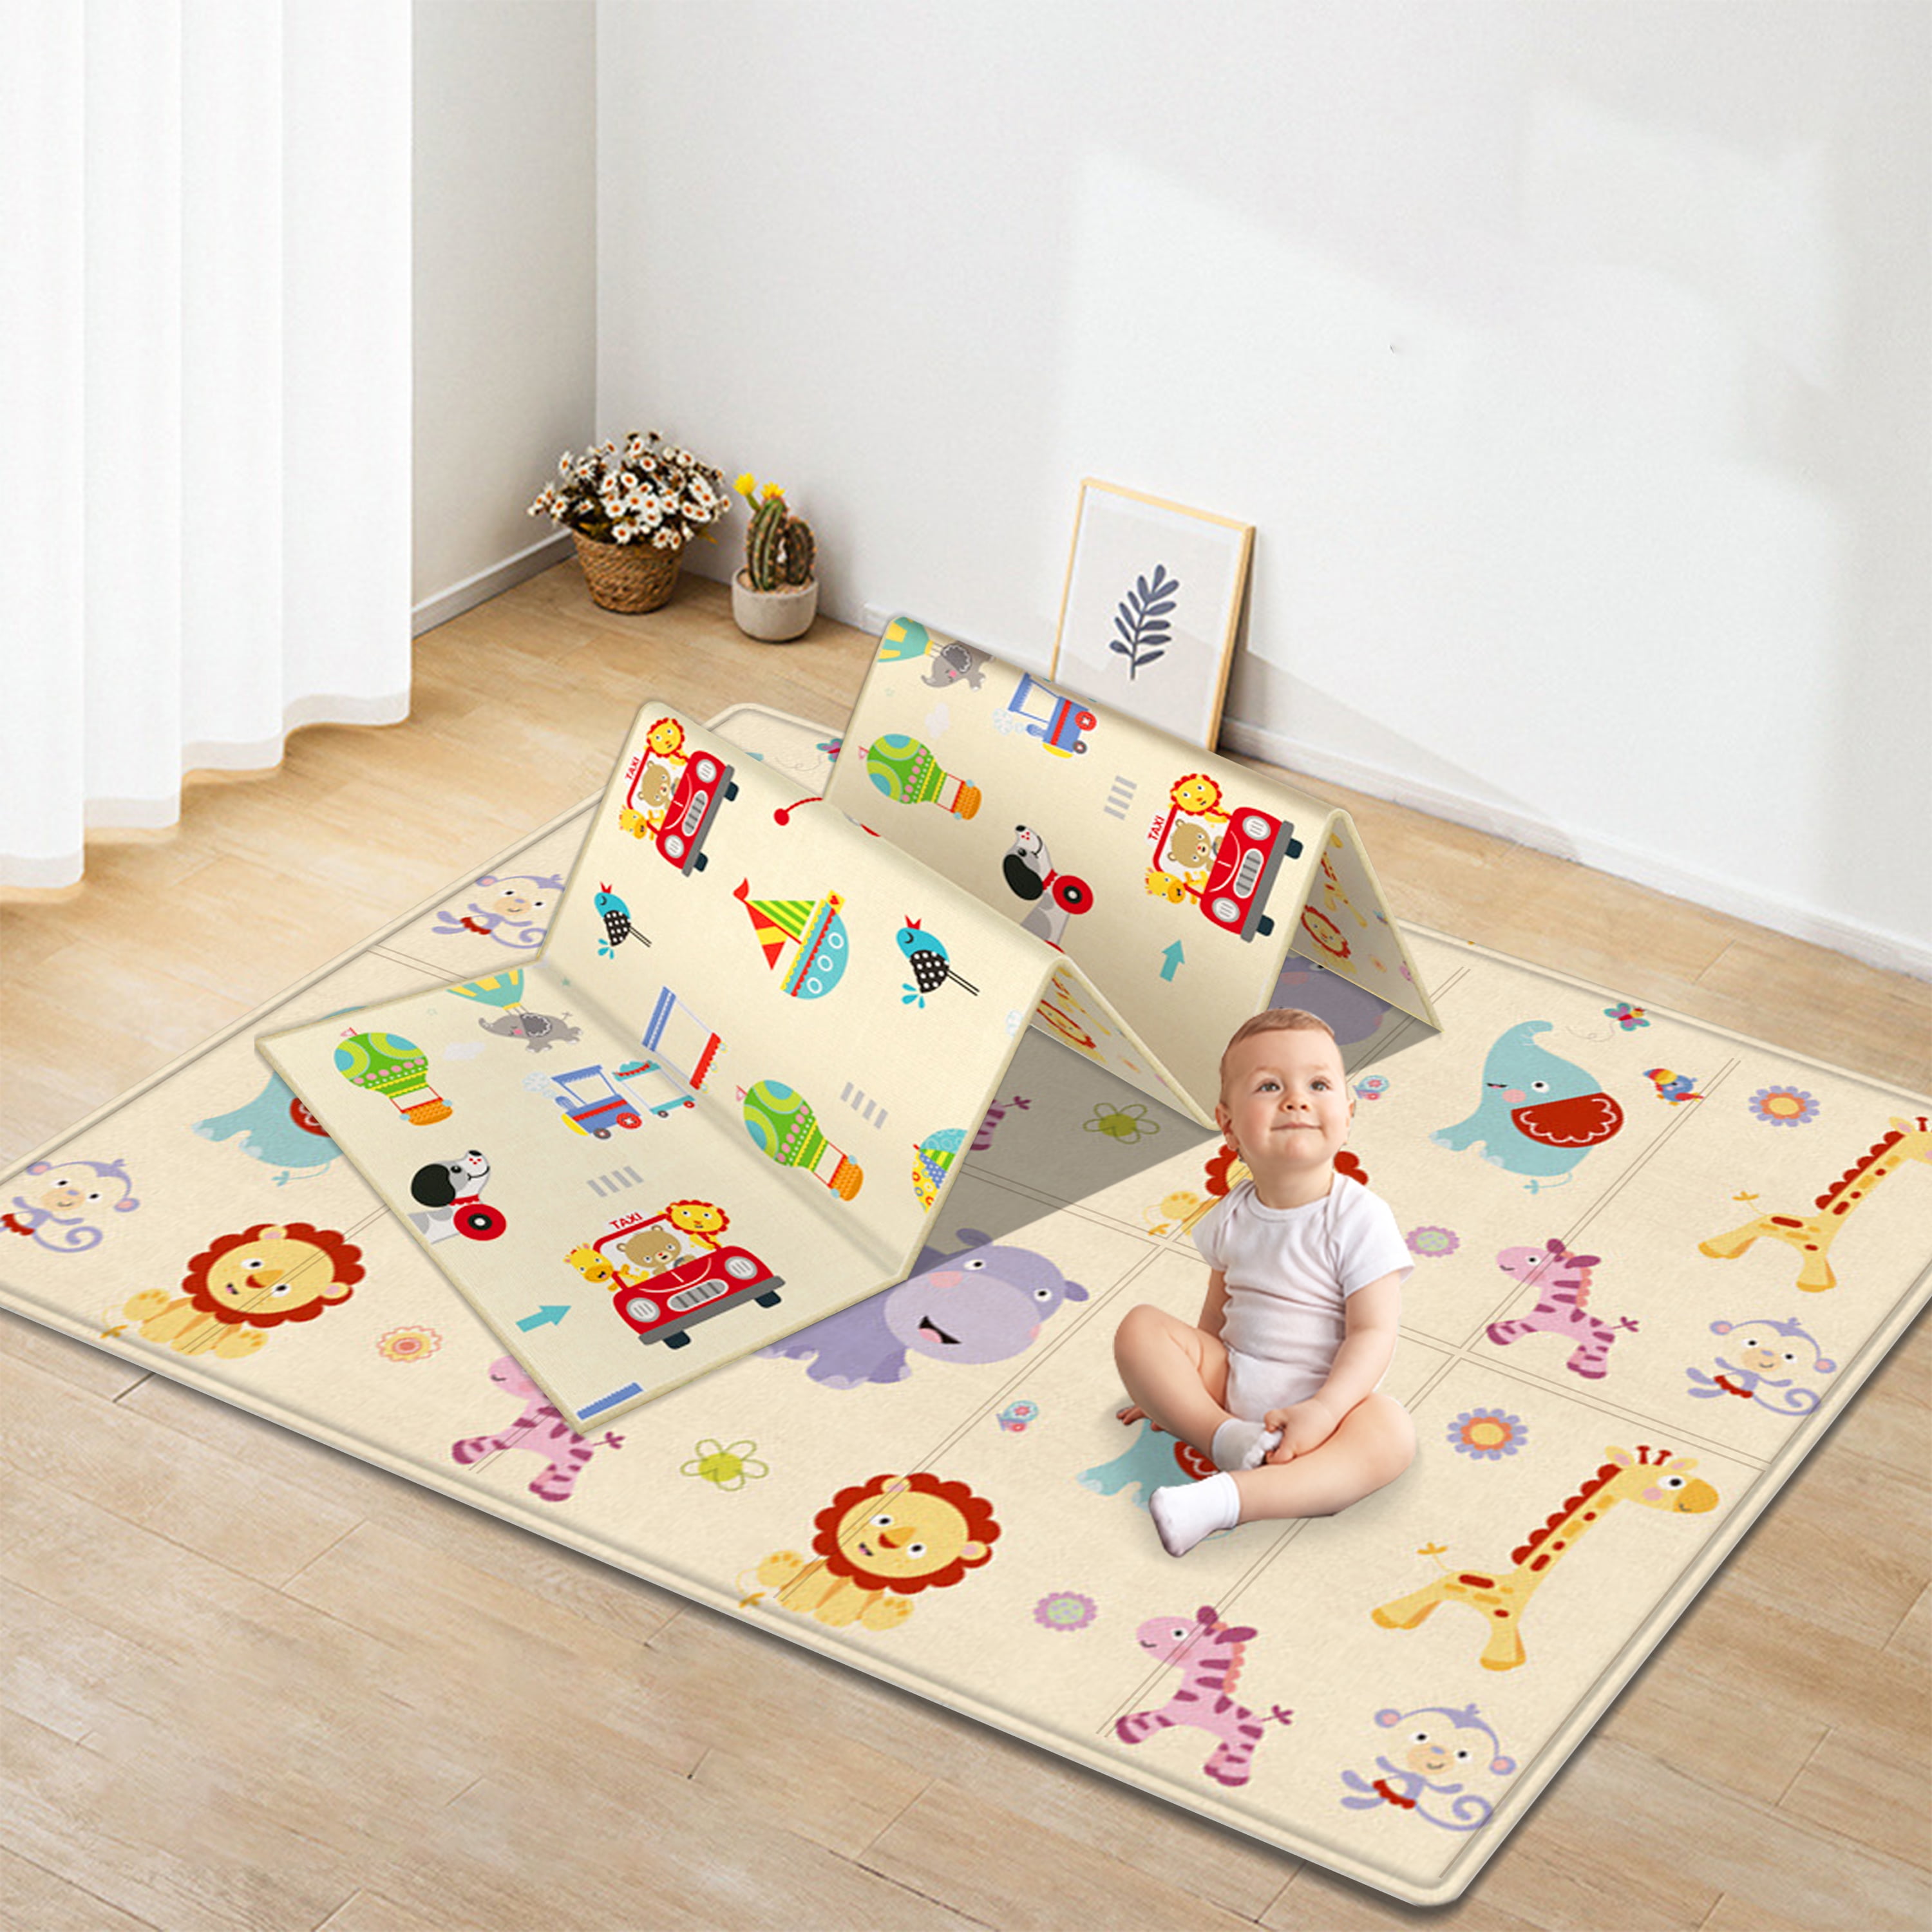 Anti Slip Soft Crawling Mat for Infants Toddlers Kids Play Mat for Baby 79x 71x 0.6 Extra Large Reversible Folding Floor Mat,Durable Wipe Clean Waterproof XPE Foam with Fabric Covering Edge 